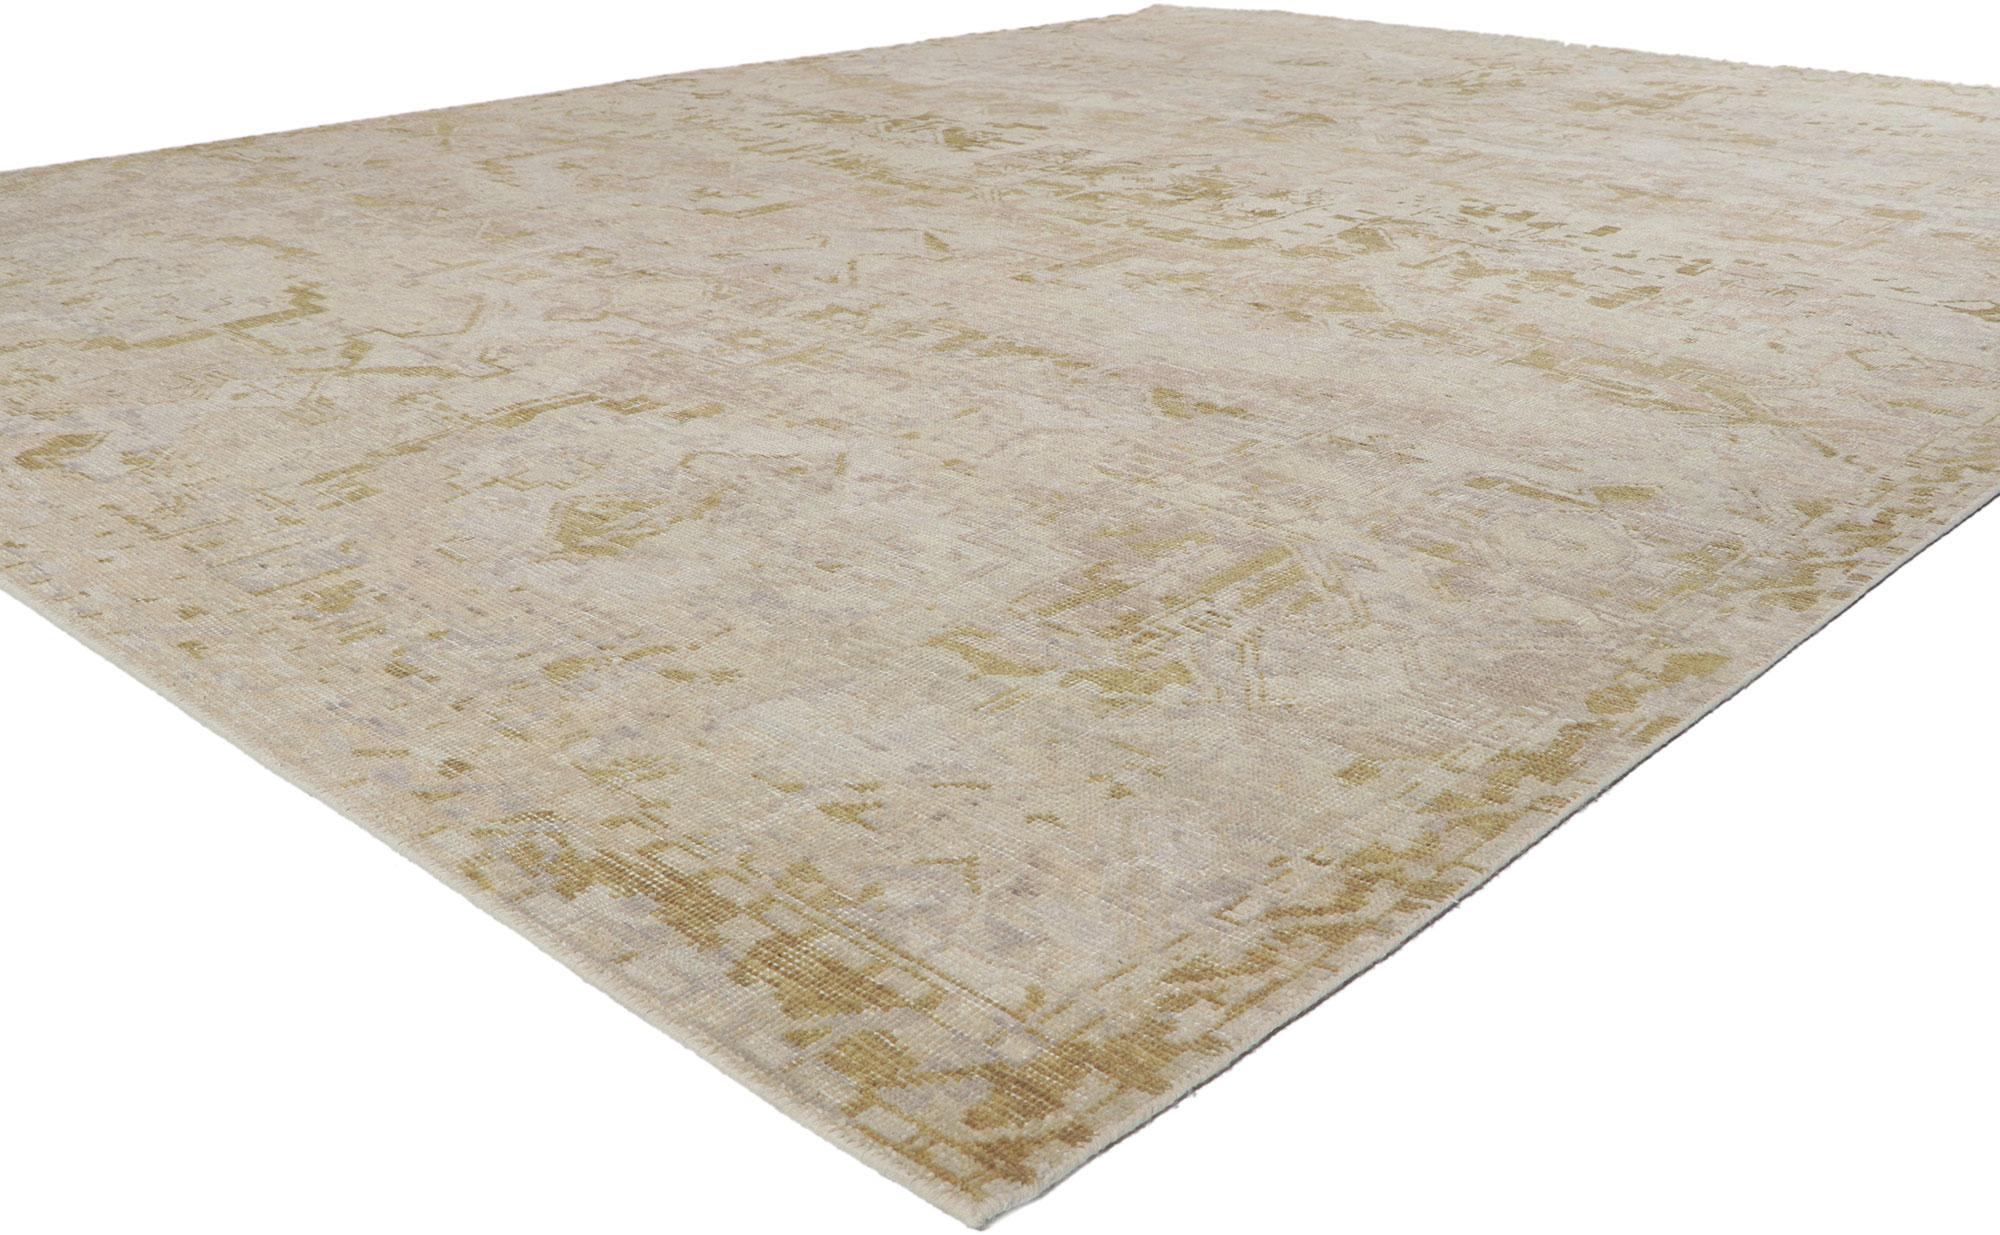 30788 New modern distressed rug with vintage style, 09'01 x 11'10. Emanating elegant sensibility and effortless beauty, this new contemporary distressed rug is a captivating vision of woven beauty. The eye-catching geometric pattern and neutral